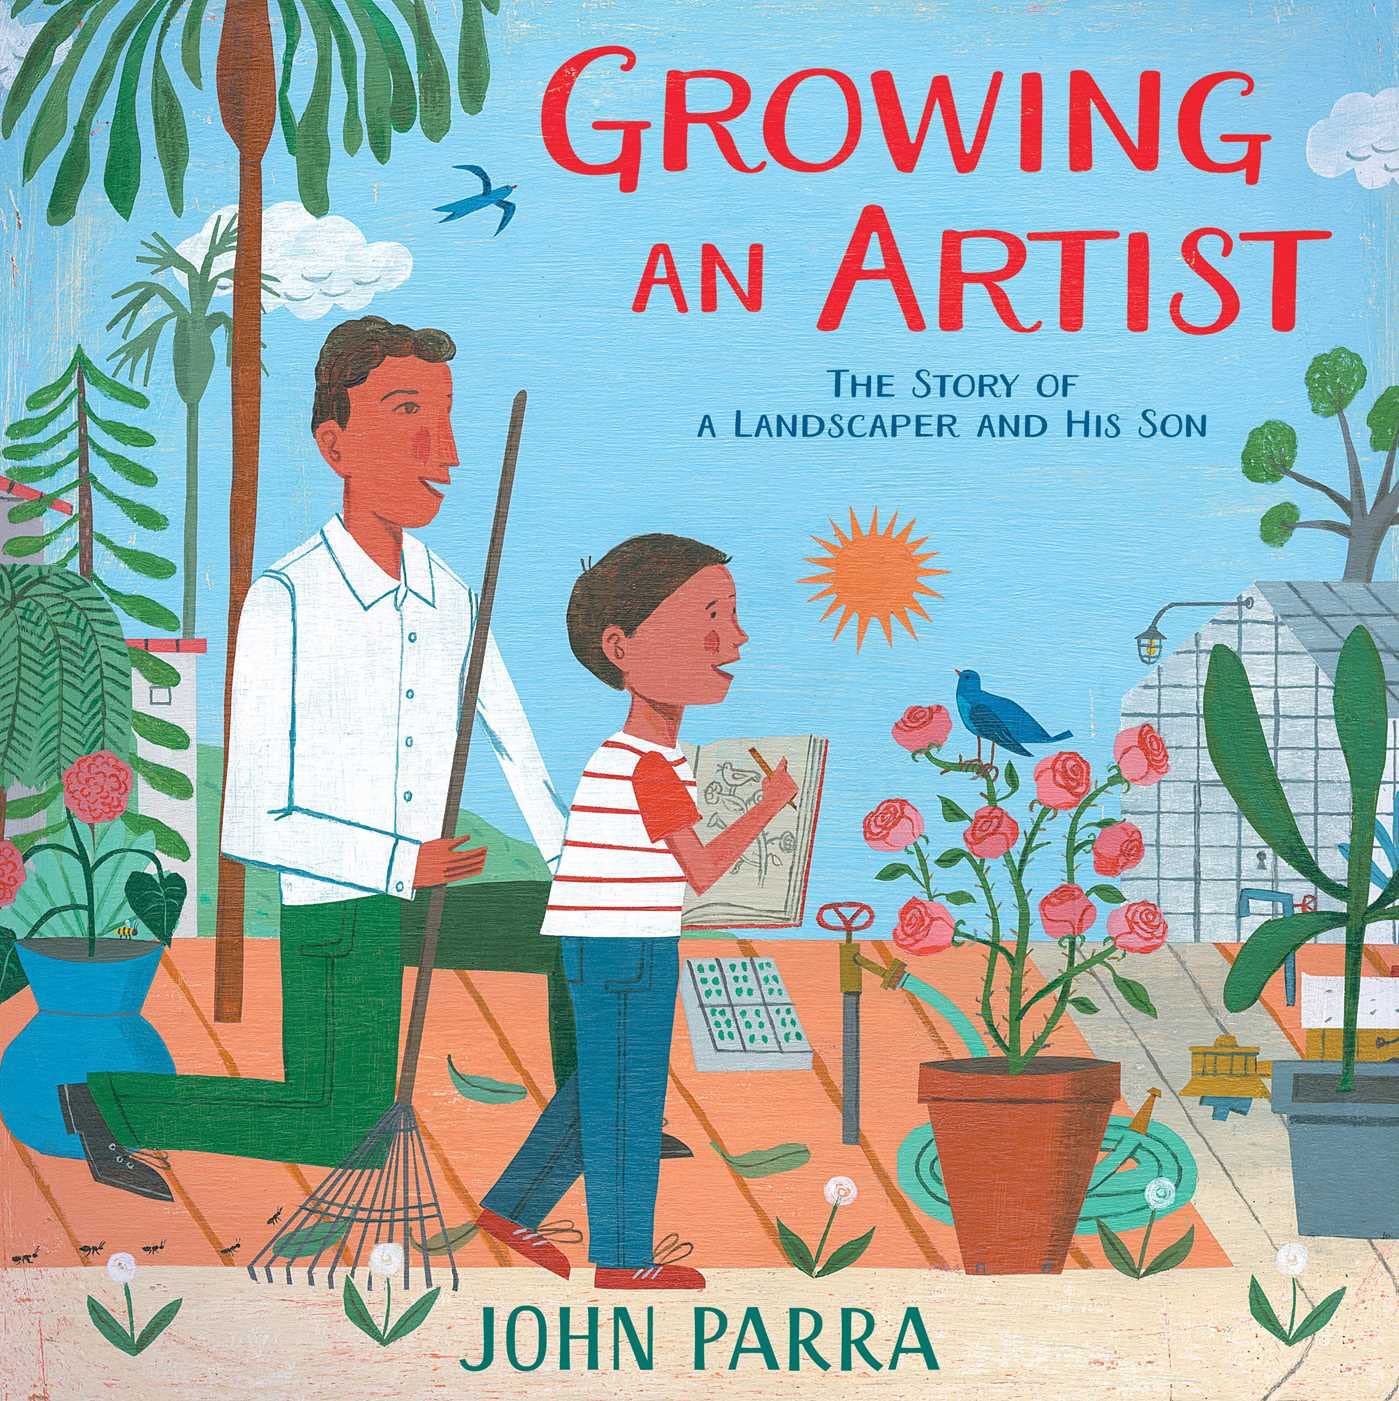 Growing an Artist: The Story of a Landscaper and His Son Hardcover